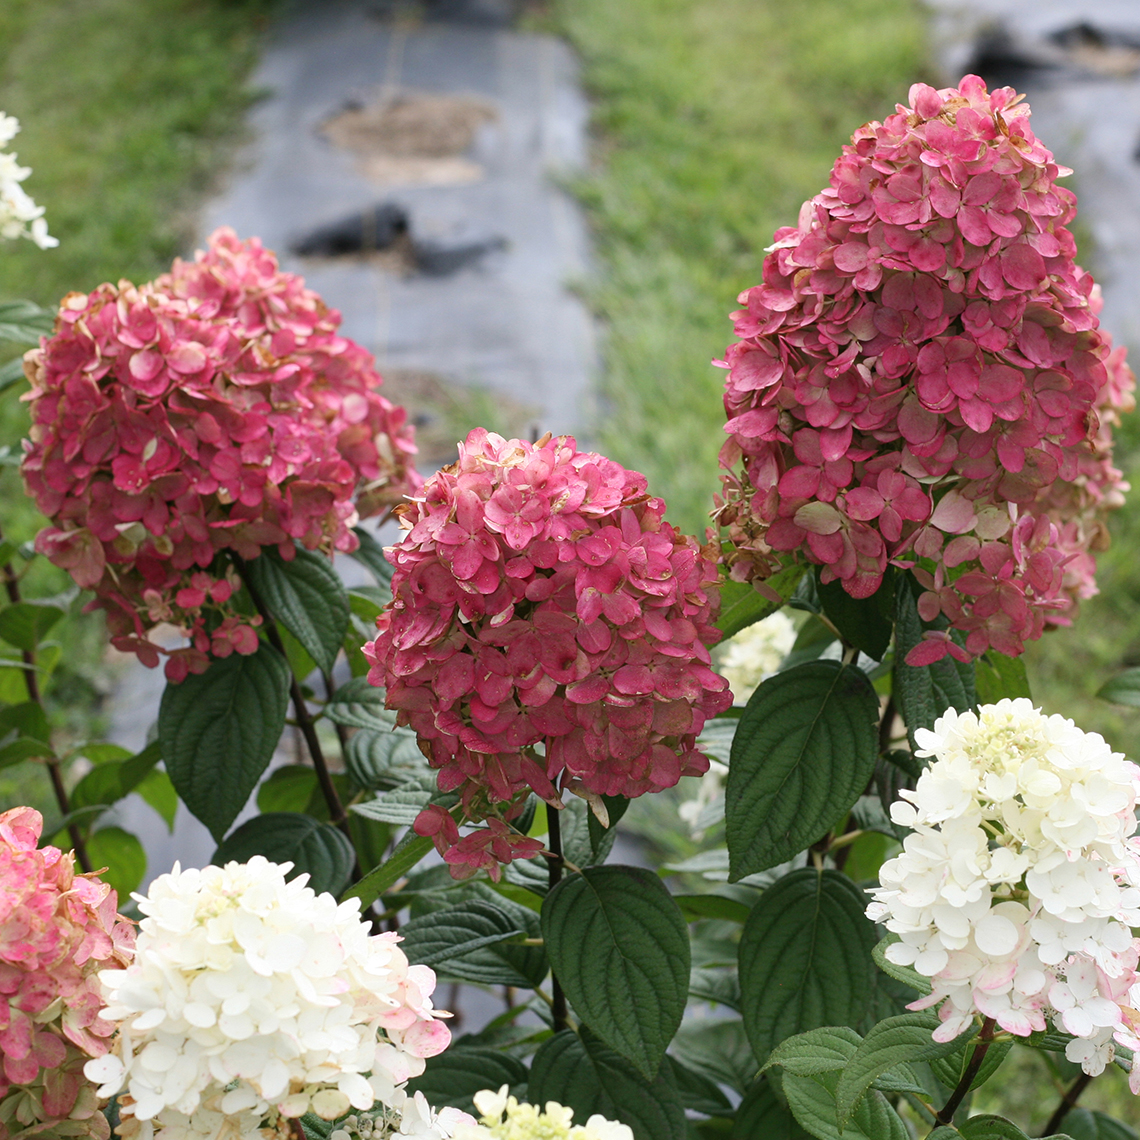 Closeup of the blooms of Fire Light panicle hydrangea showing both the white and red coloration